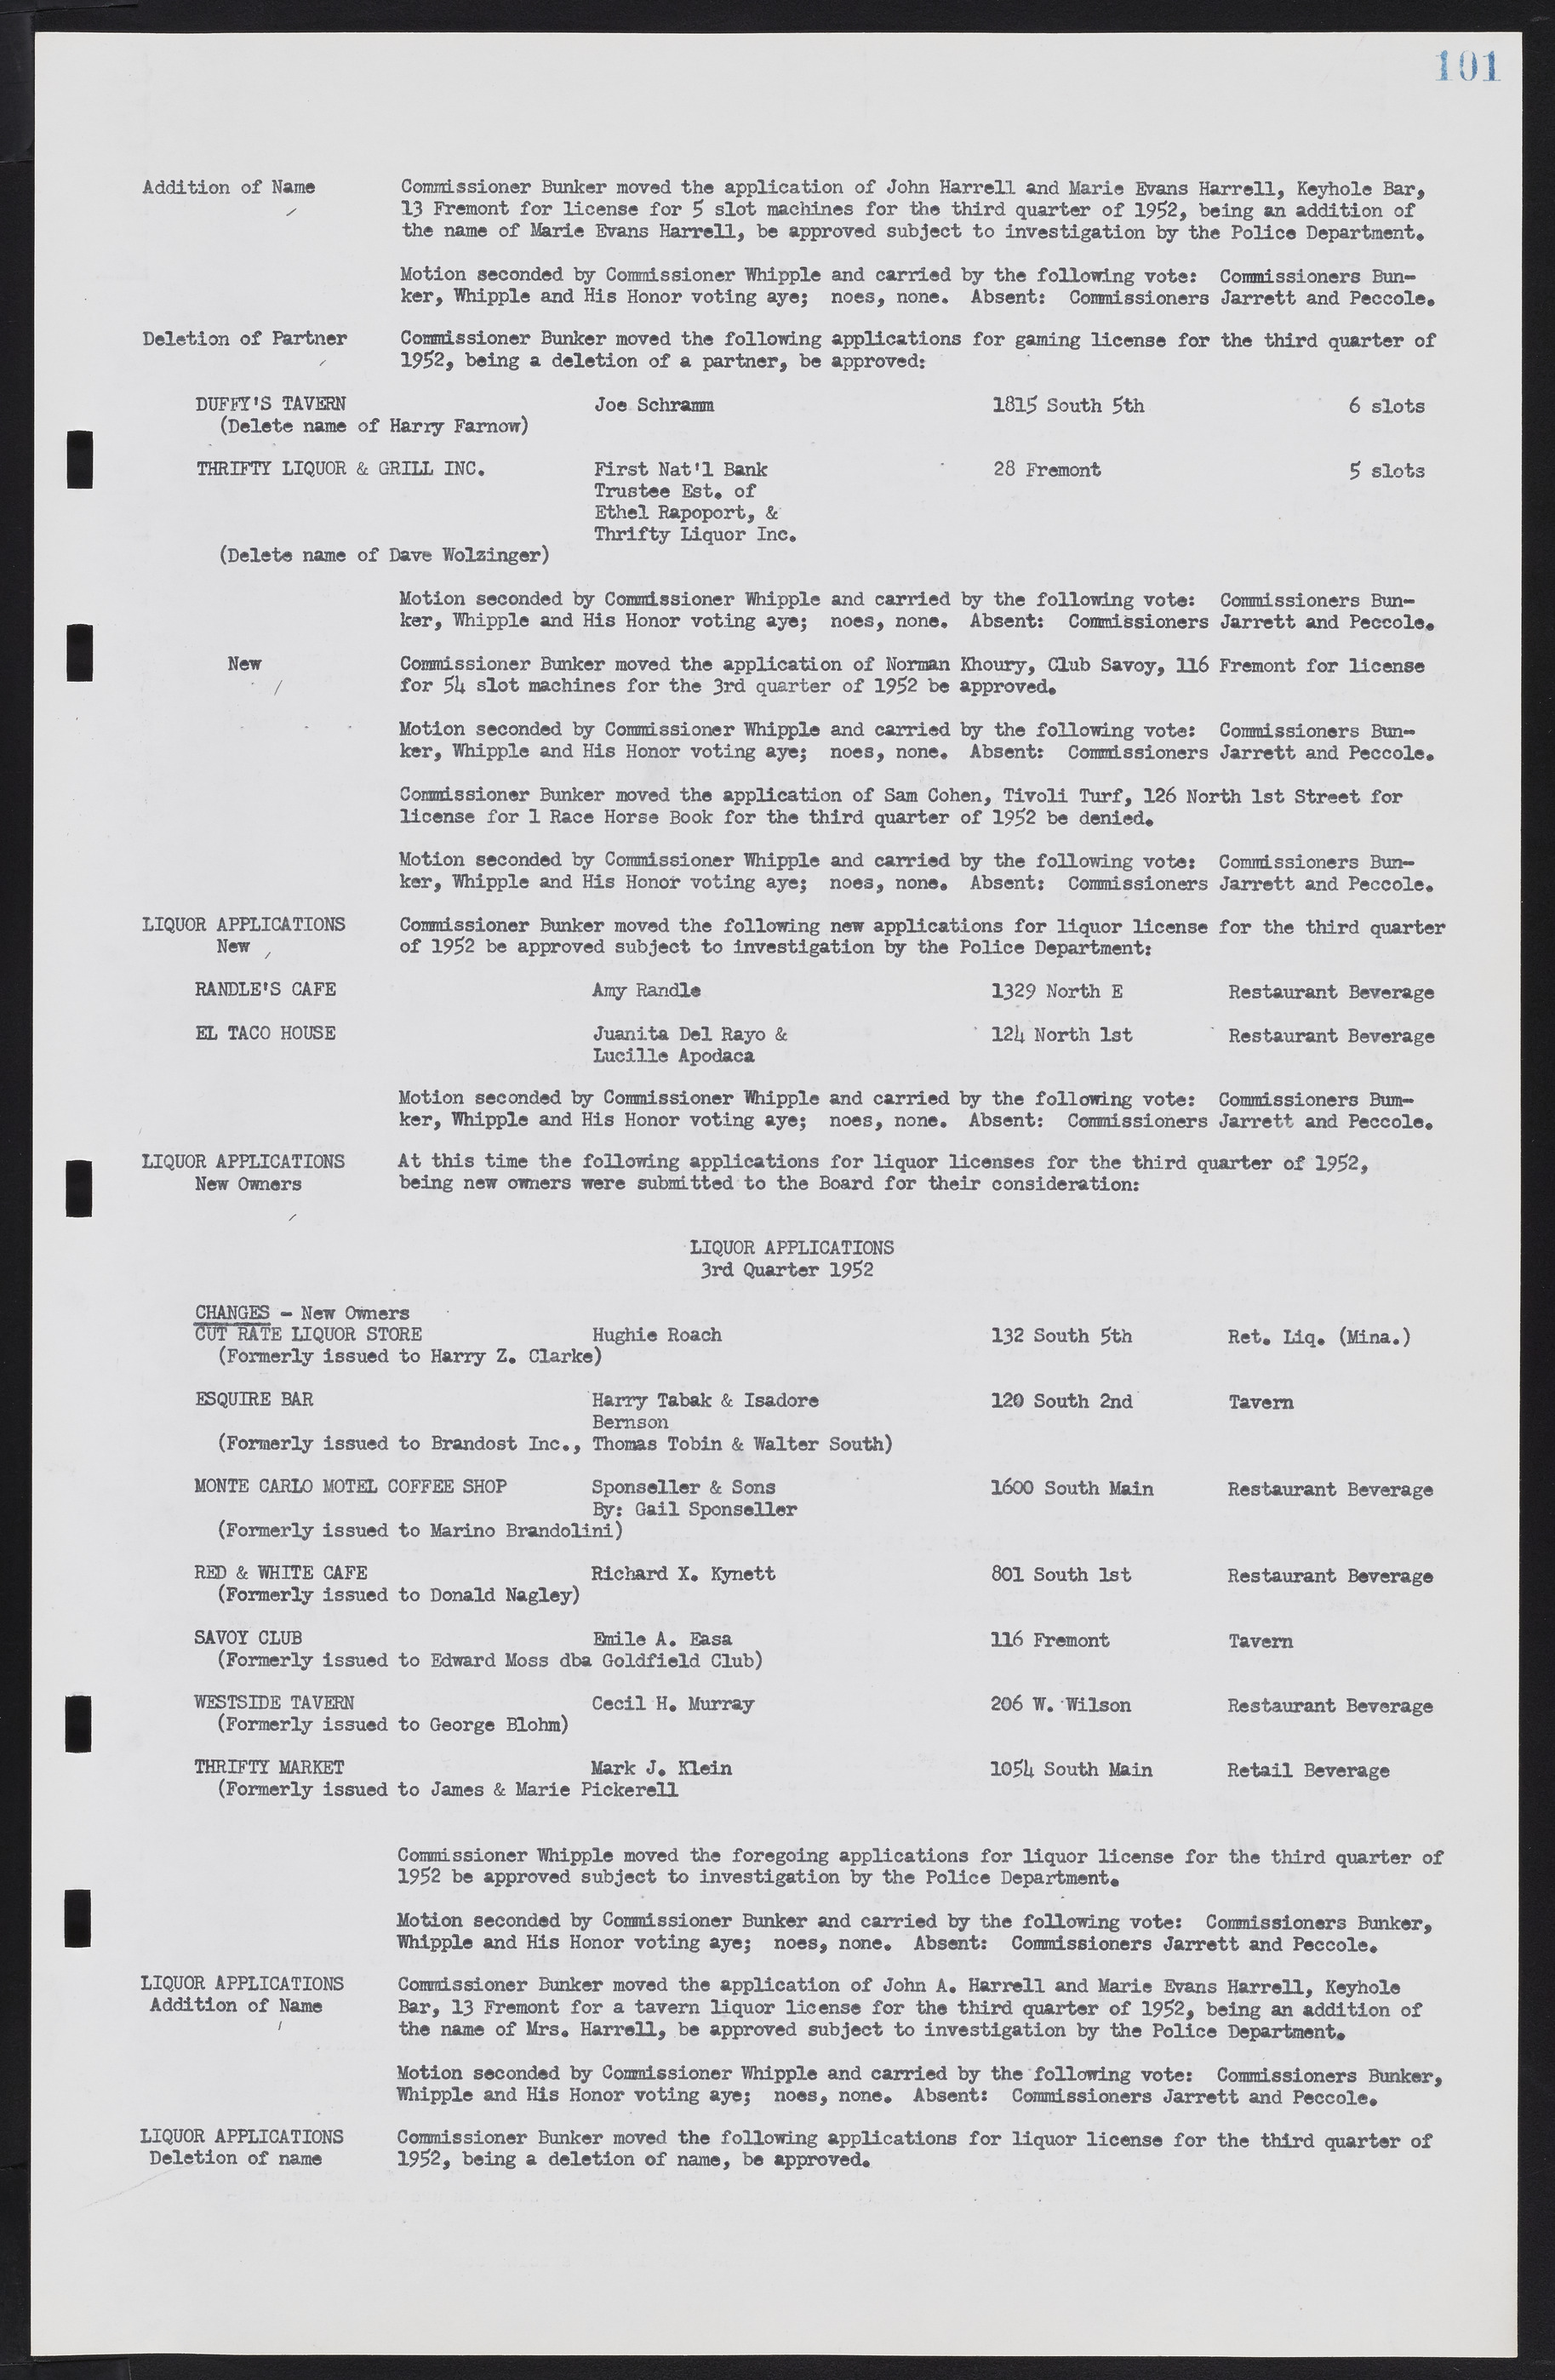 Las Vegas City Commission Minutes, May 26, 1952 to February 17, 1954, lvc000008-105